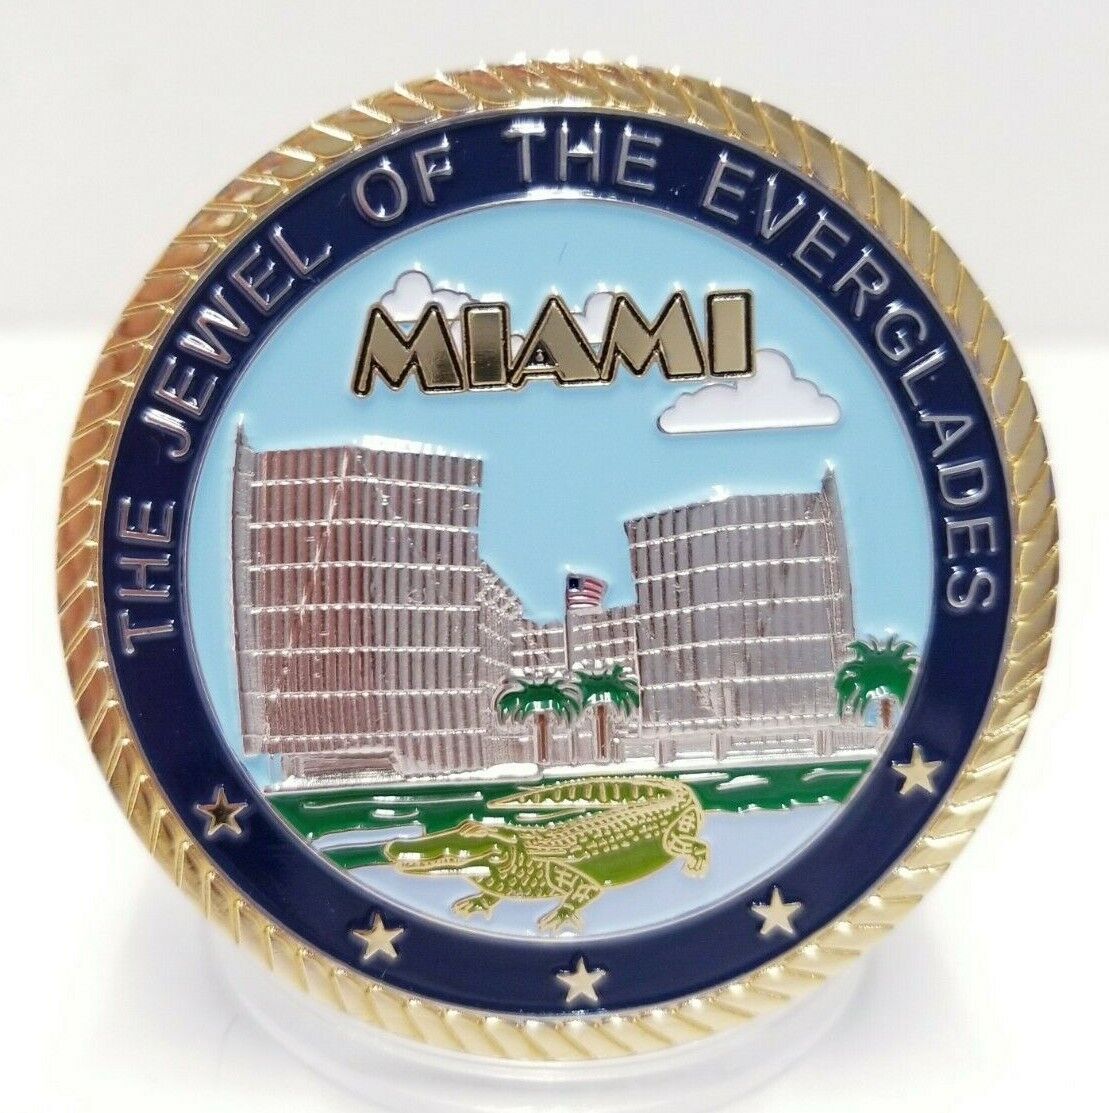 THE JEWEL OF THE EVERGLADES MIAMI DEPARTMENT OF JUSTICE F.B.I. CHALLENGE COIN